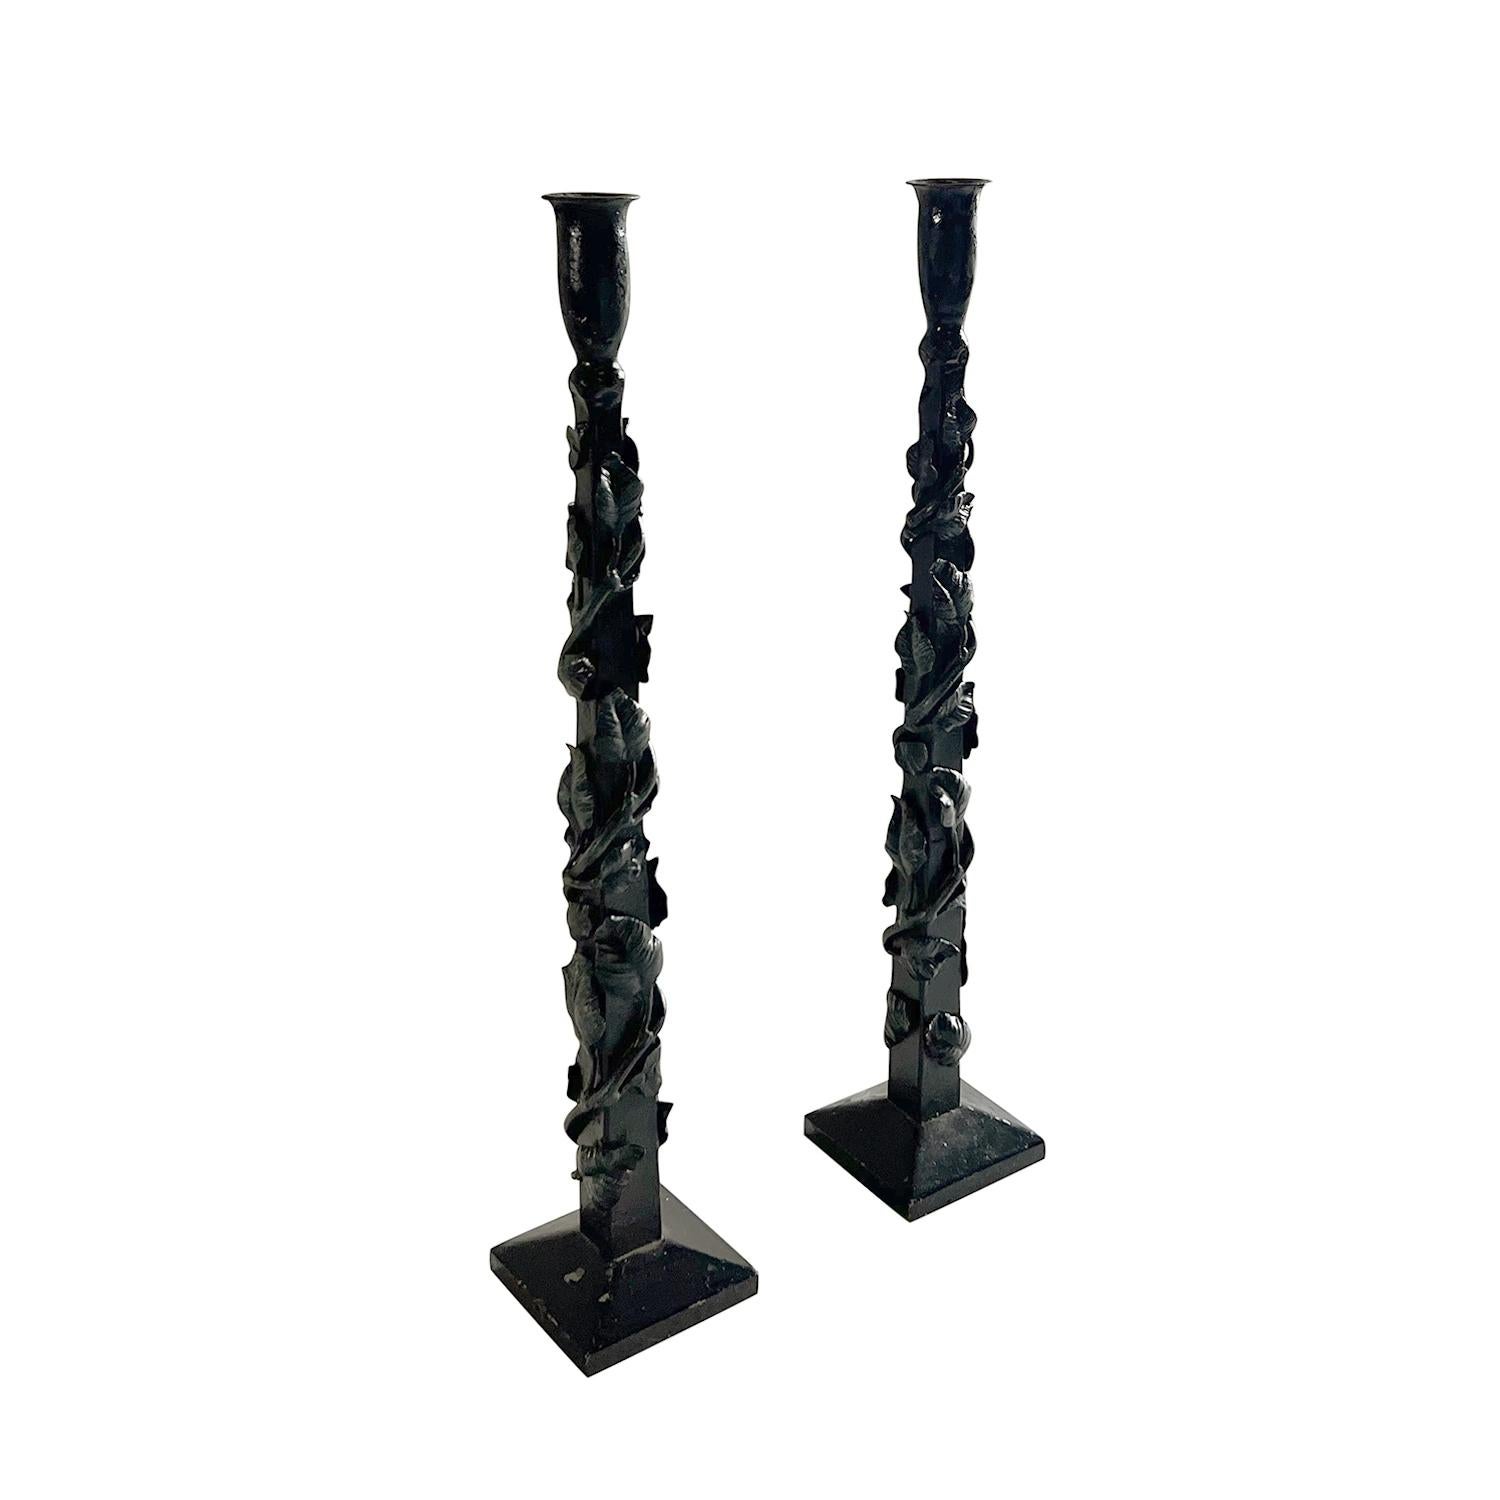 A vintage French pair of handsome brutalist iron candleholders hand forged and hammered with their original painted finish. These elegant and simple pair of candle sticks have perfect proportions, great details and sit on square feet. Hand forged in